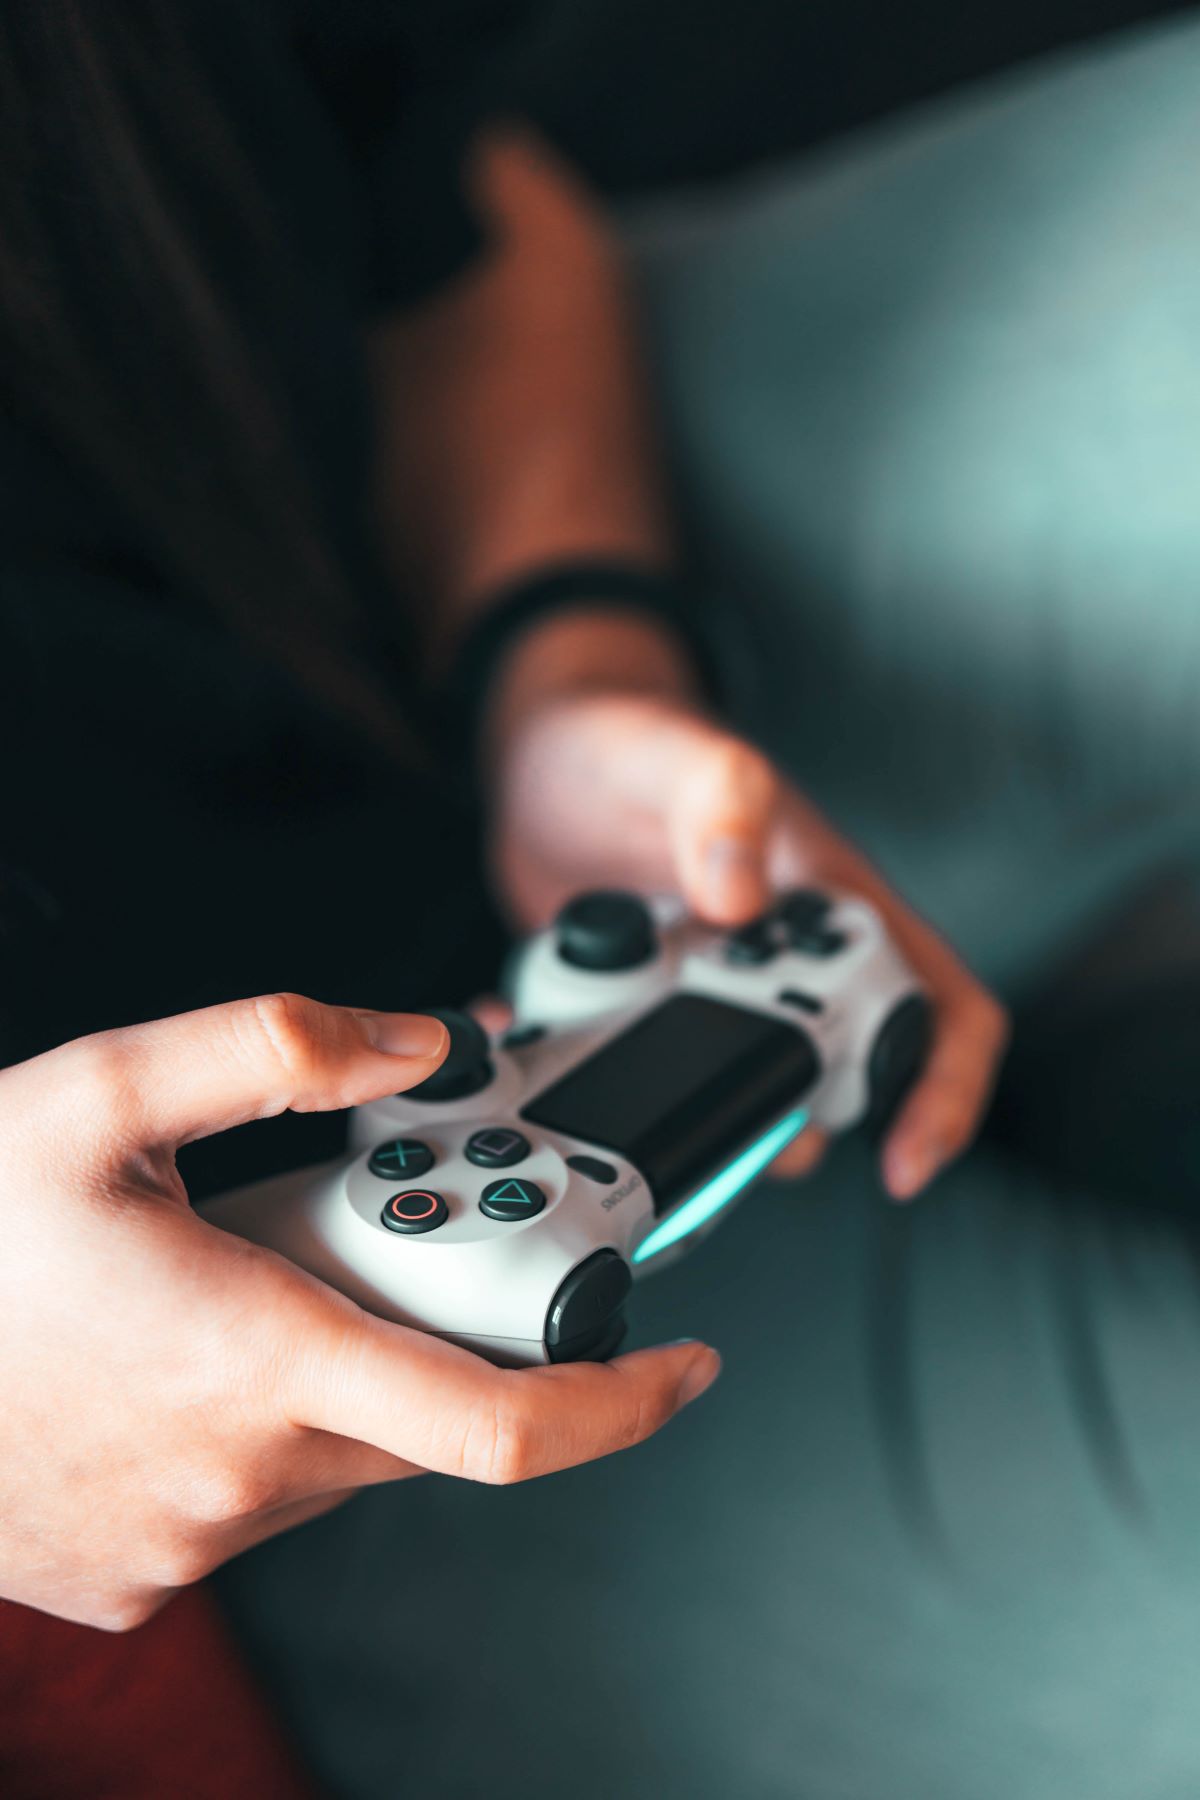 Using a video game controller; photo by Sora Khan on Unsplash